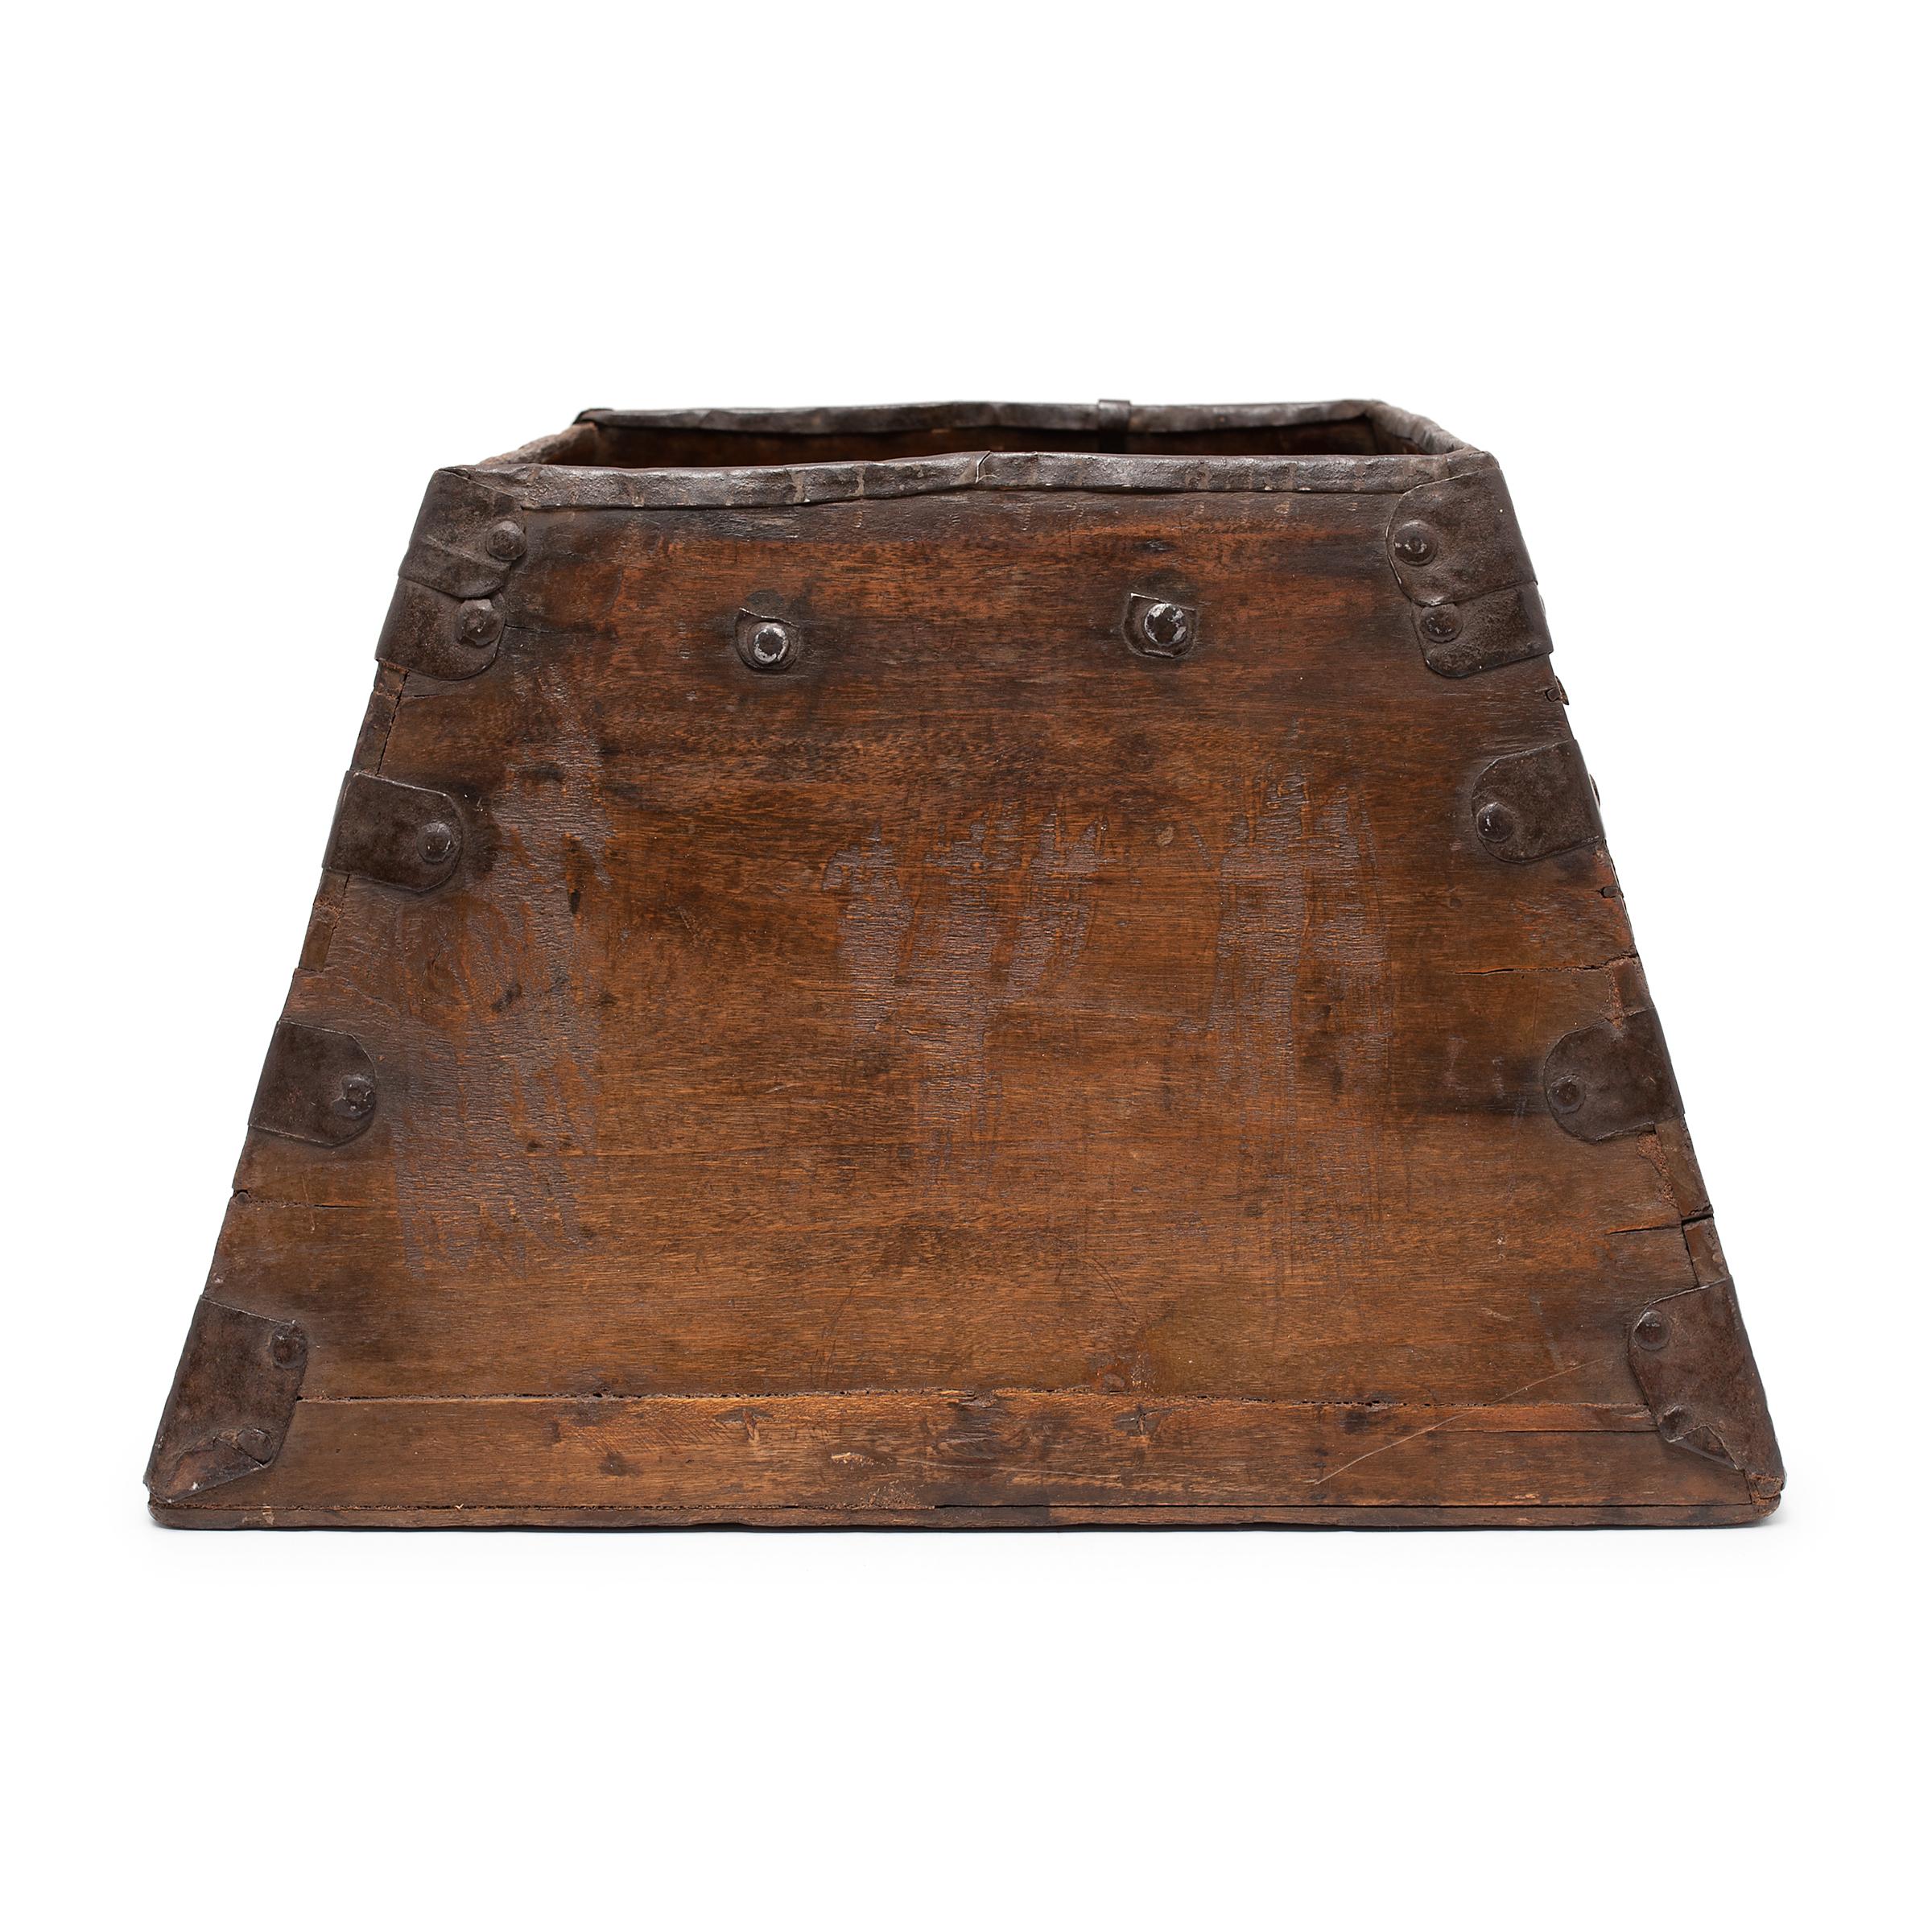 This rustic container was made over a hundred years ago to measure and hold a dou of rice, an ancient Chinese measurement. The rice measure has a square form with tapered sides and edges trimmed with iron fittings to protect against damage. This